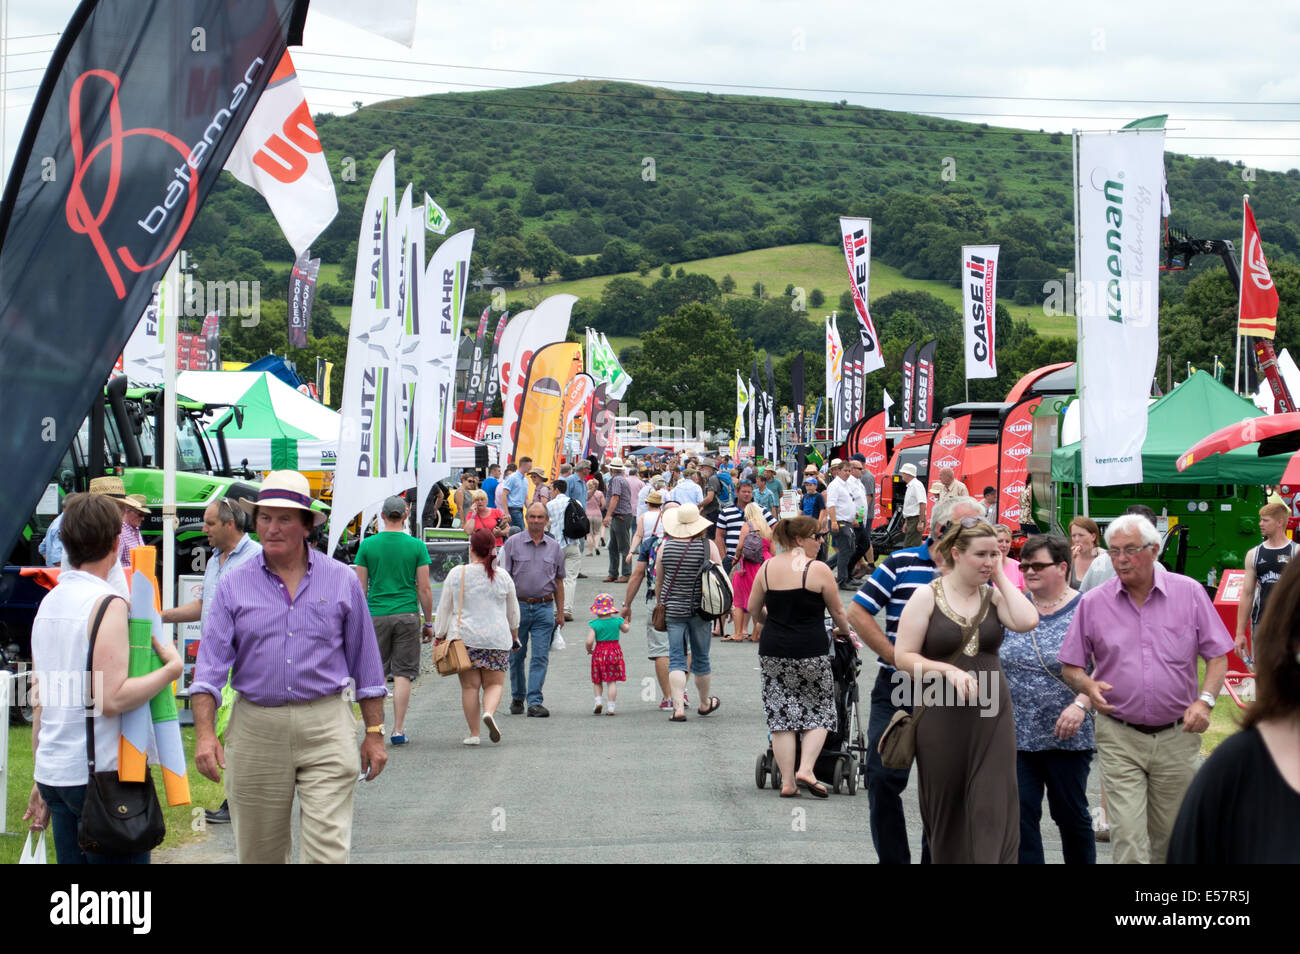 Crowd passing through tractor machinery stands at the Royal Welsh Show 2014 Stock Photo